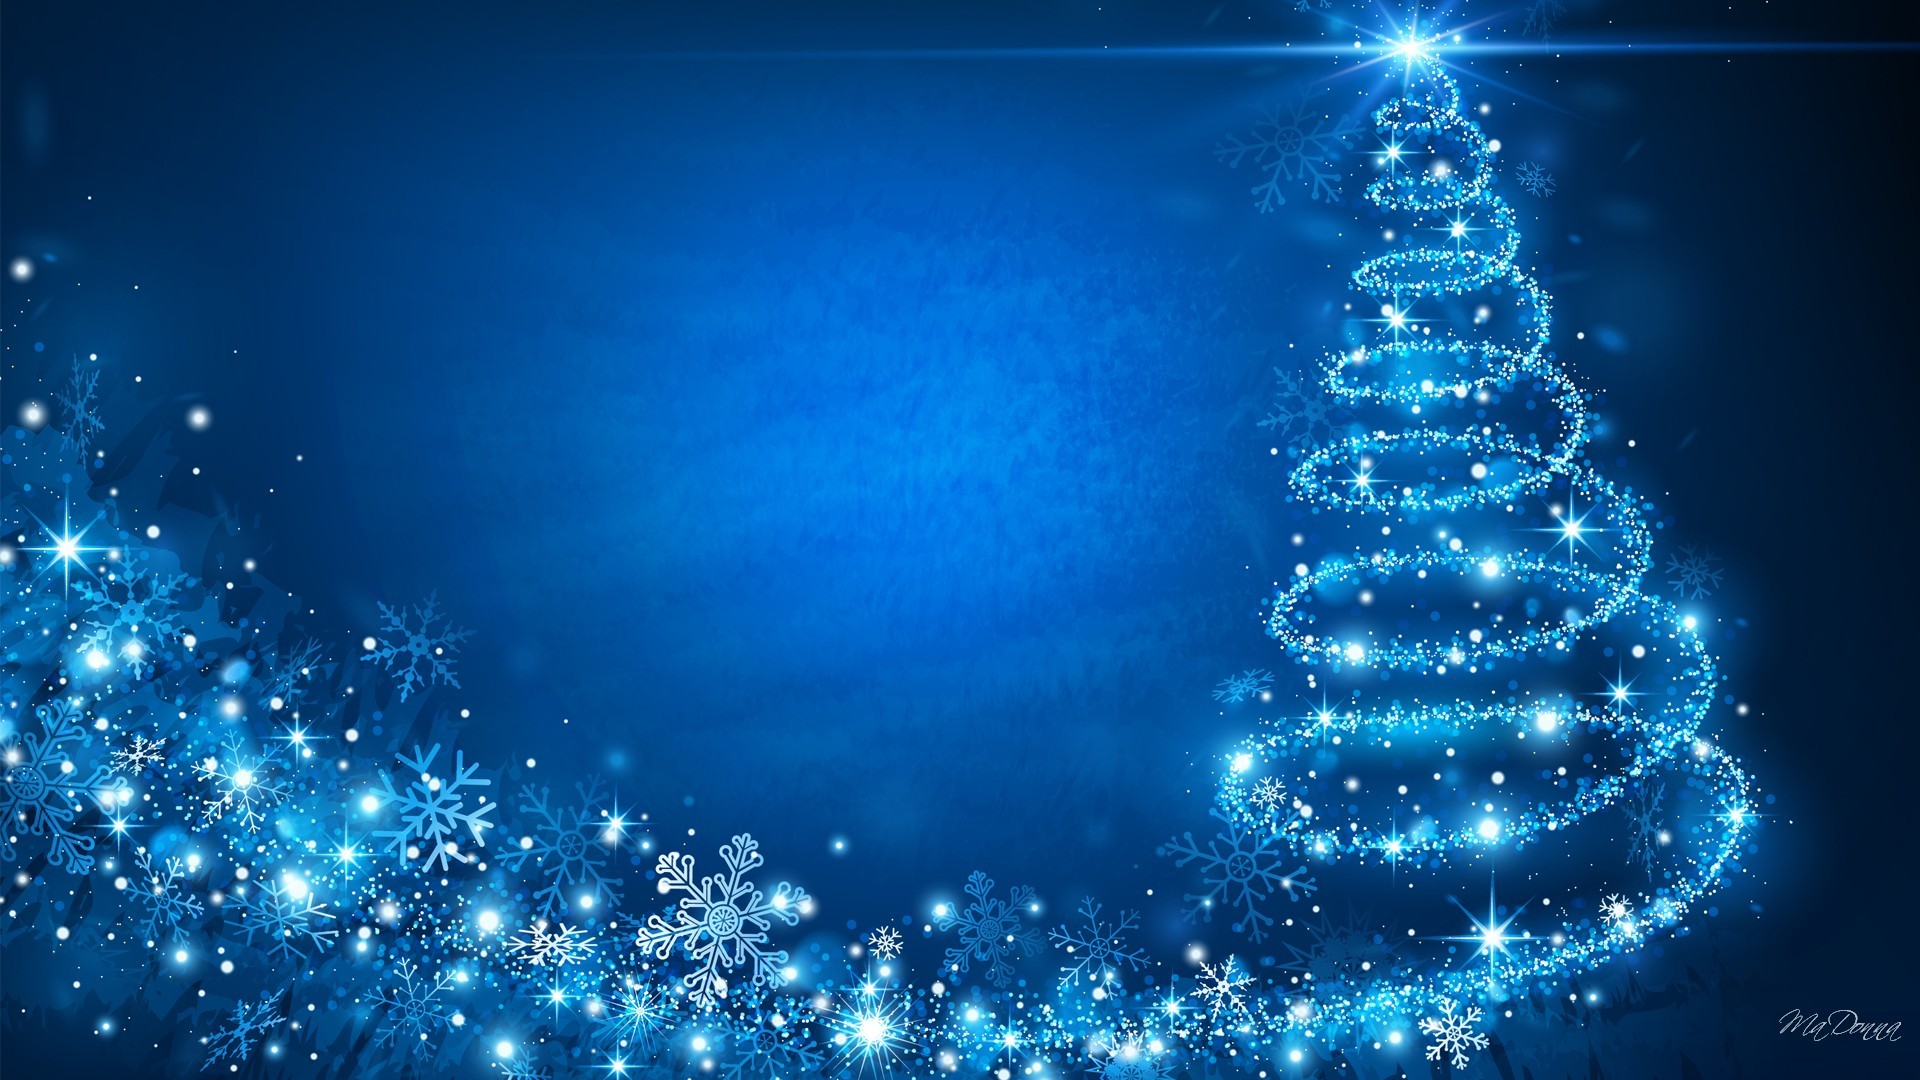 72 Blue Christmas Wallpapers on WallpaperPlay